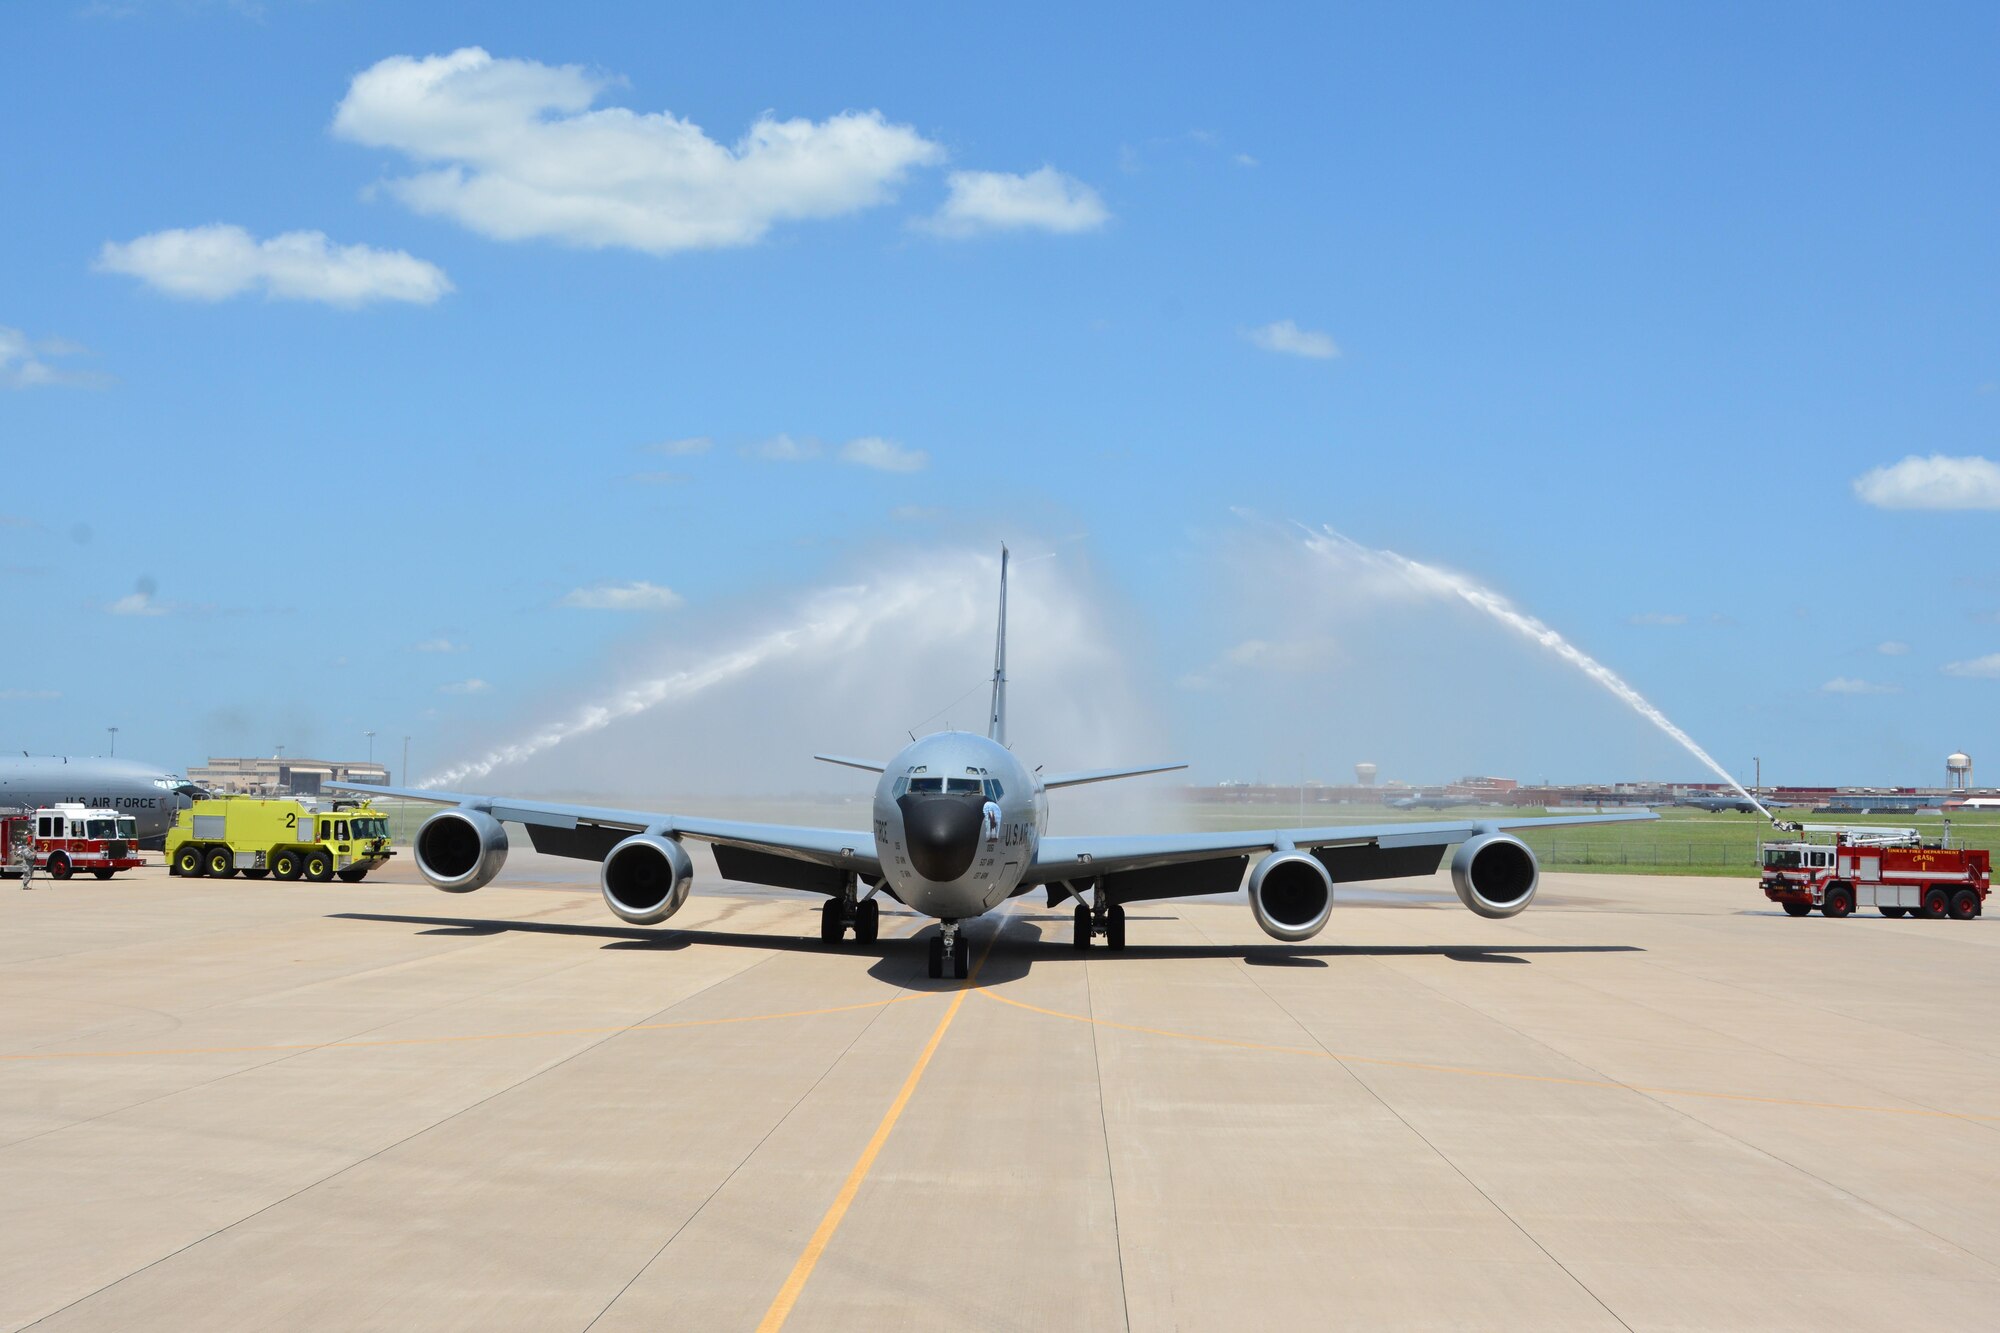 A 137th Air Refueling Wing aircrew taxis in a Reserve KC-135R as they completed the last day flight of the association, June 24, 2015 at Tinker Air Force Base. This final fight marks an end to the formal Air Reserve Component Association between the 507th Air Refueling Wing and the 137th ARW (U.S. Air Force Photo/Maj. Jon Quinlan).
